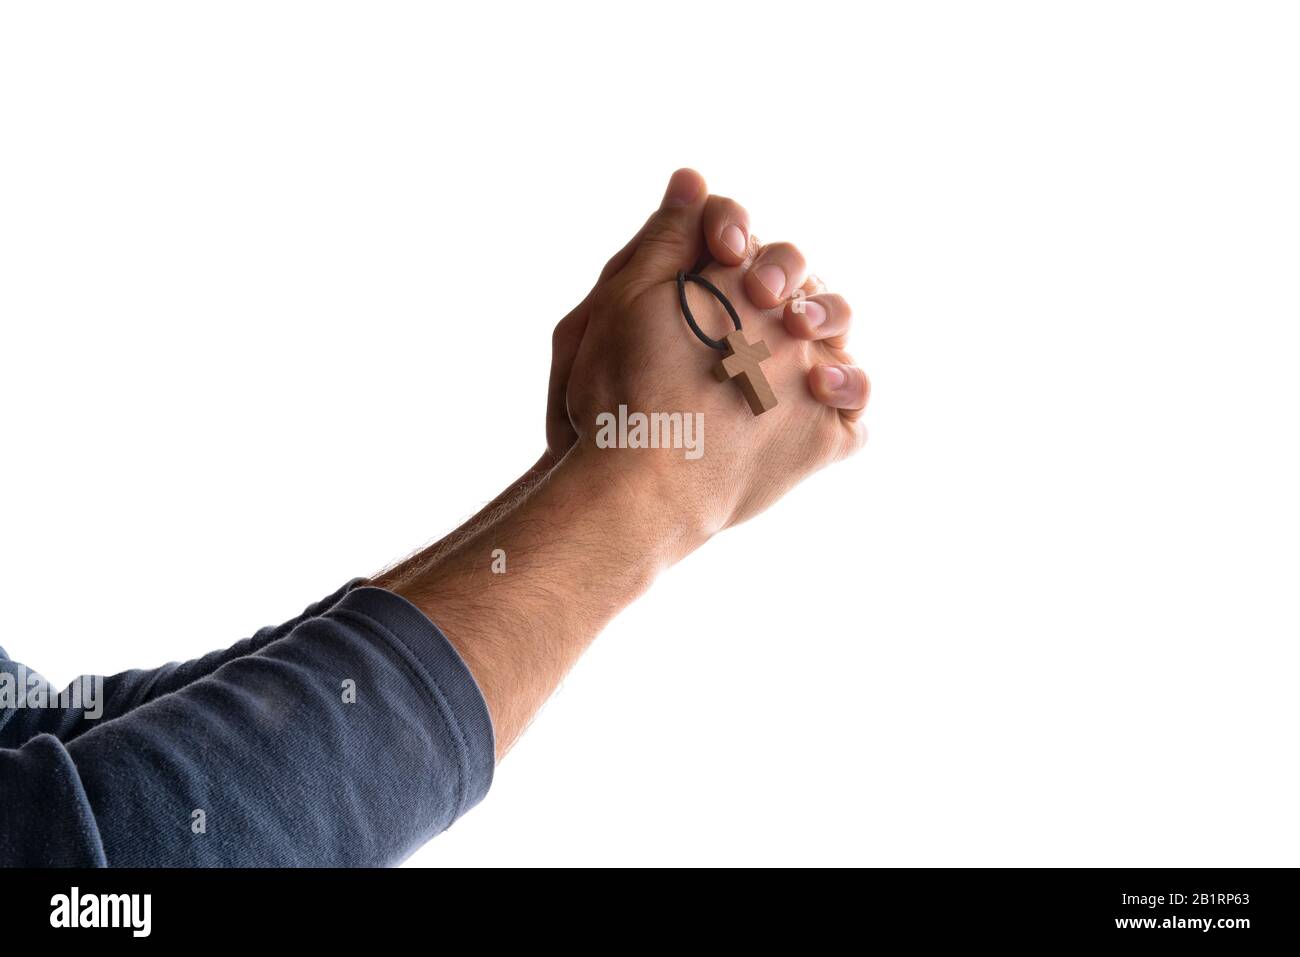 Man praying in church with his hands closed and with pendant with cross symbol in his hand and flash. Horizontal composition Stock Photo